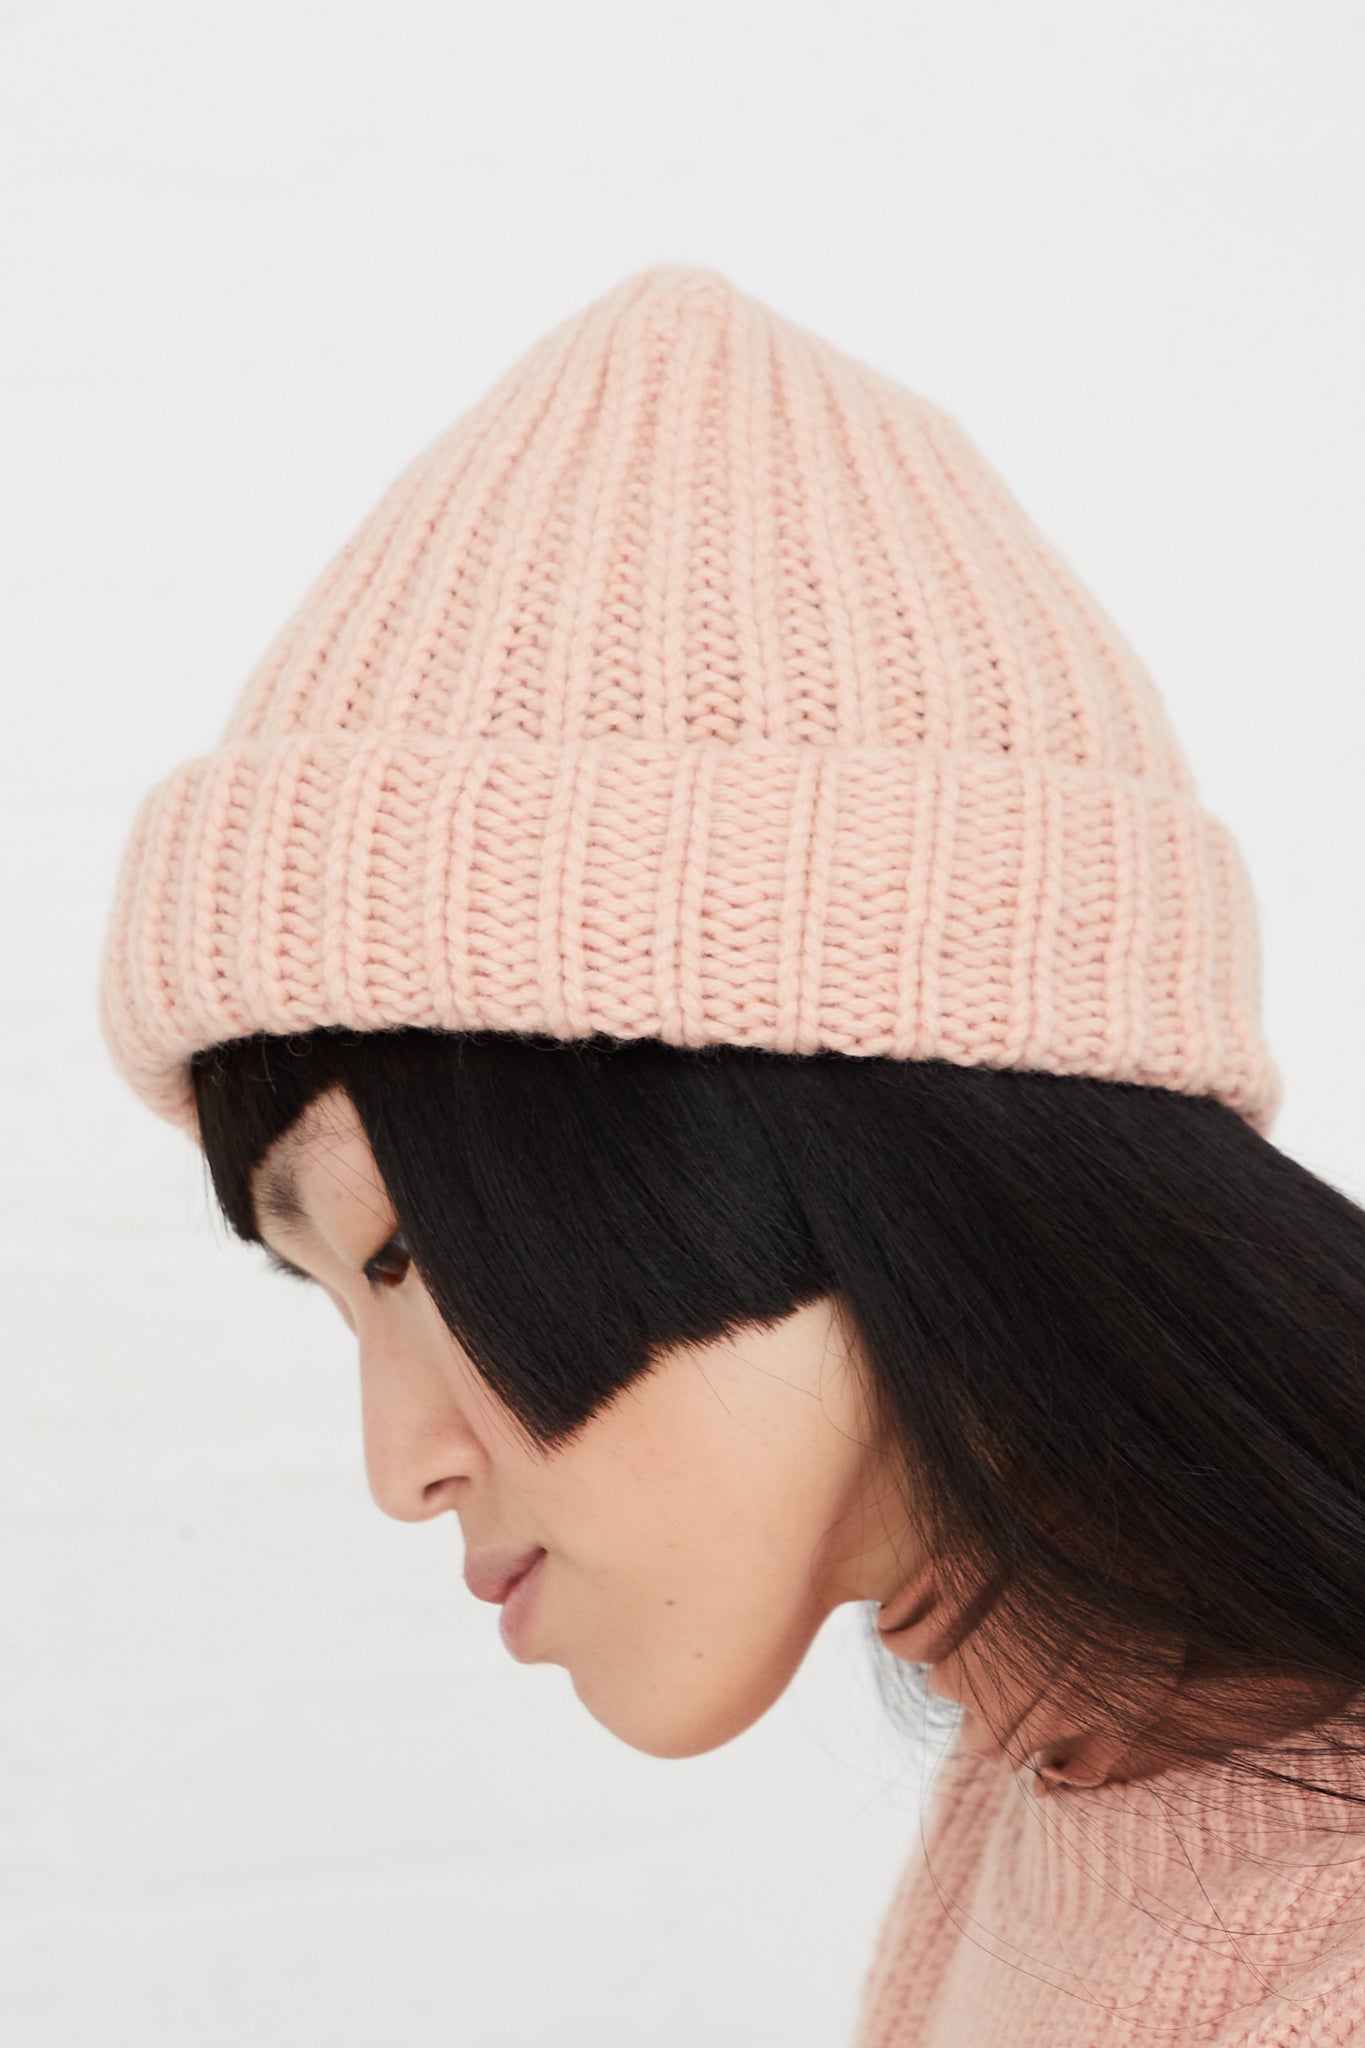 BASERANGE - Recycled Wool Beanie in Pink | Oroboro Store | Side Profile